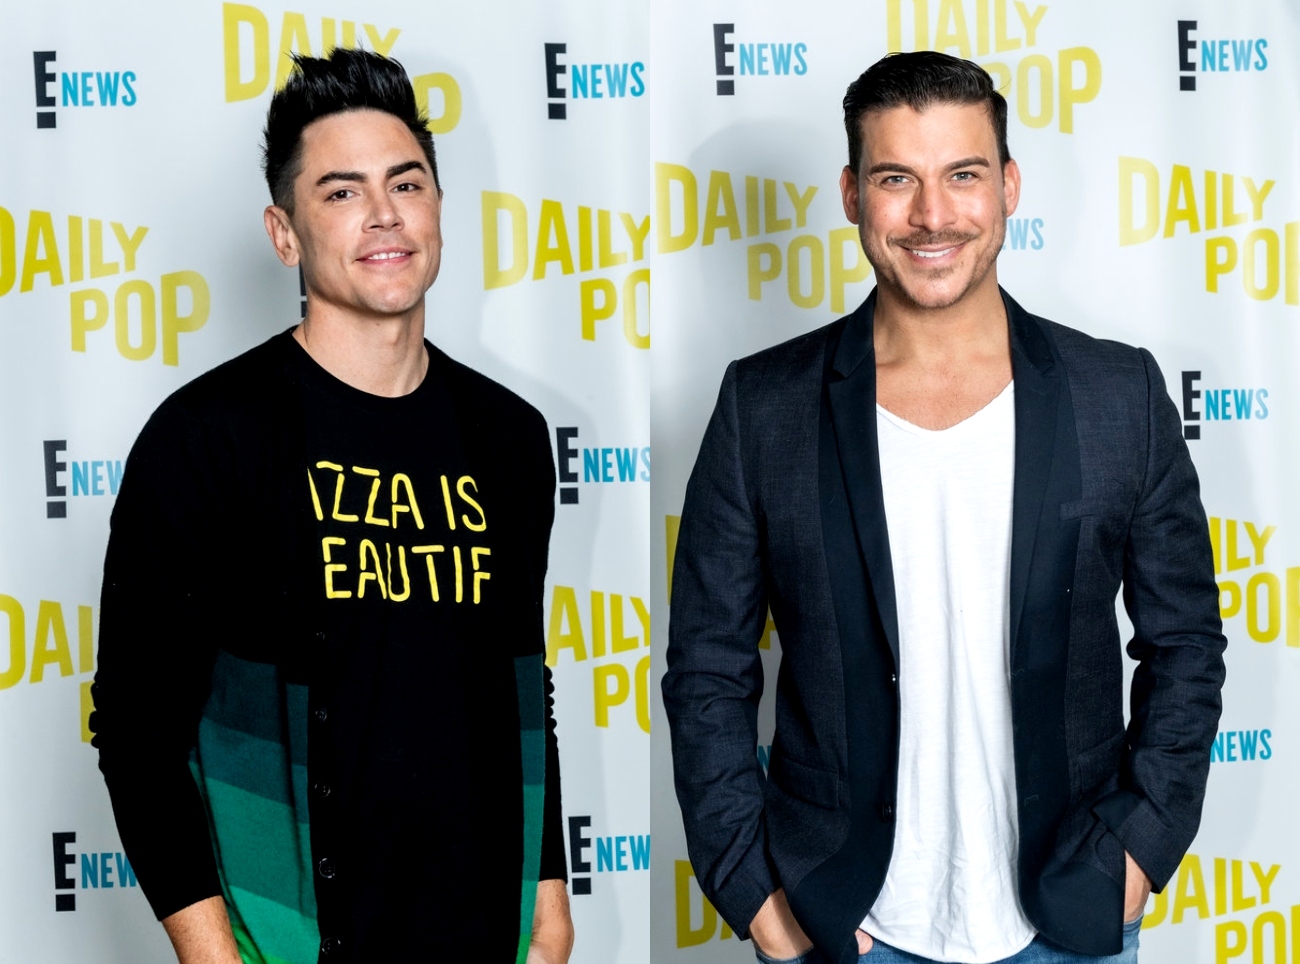 Vanderpump Rules' Tom Sandoval Reacts After Jax Taylor Claims He Regrets Having Him as a Best Man in His Wedding, Plans to Open a 'Really Seedy' Dive Bar With Tom Schwartz